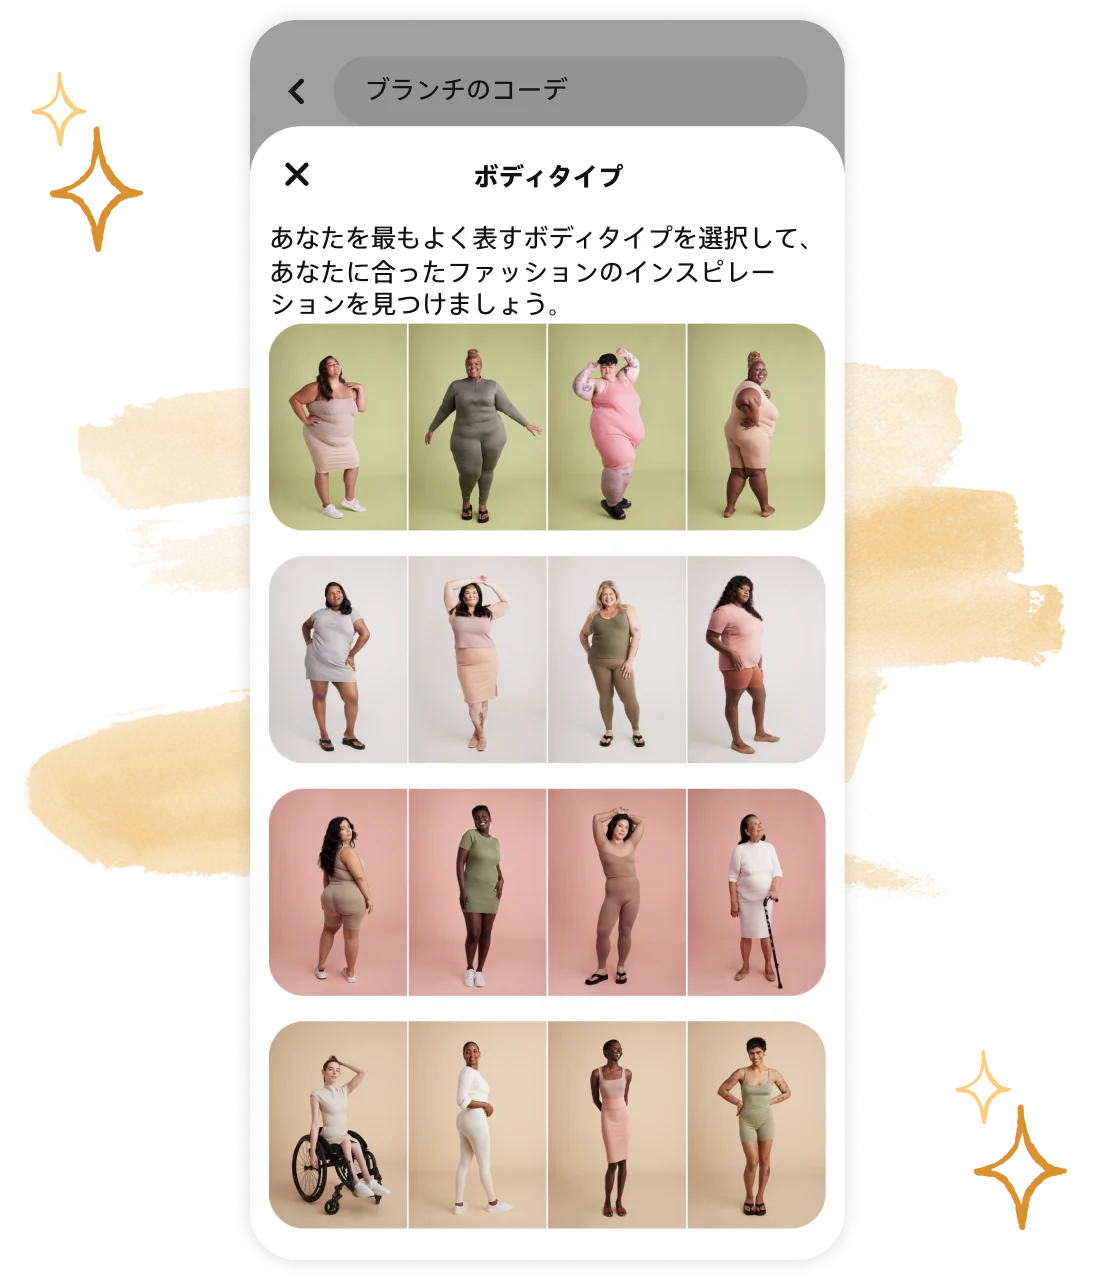 Phone screen showing 16 different body types